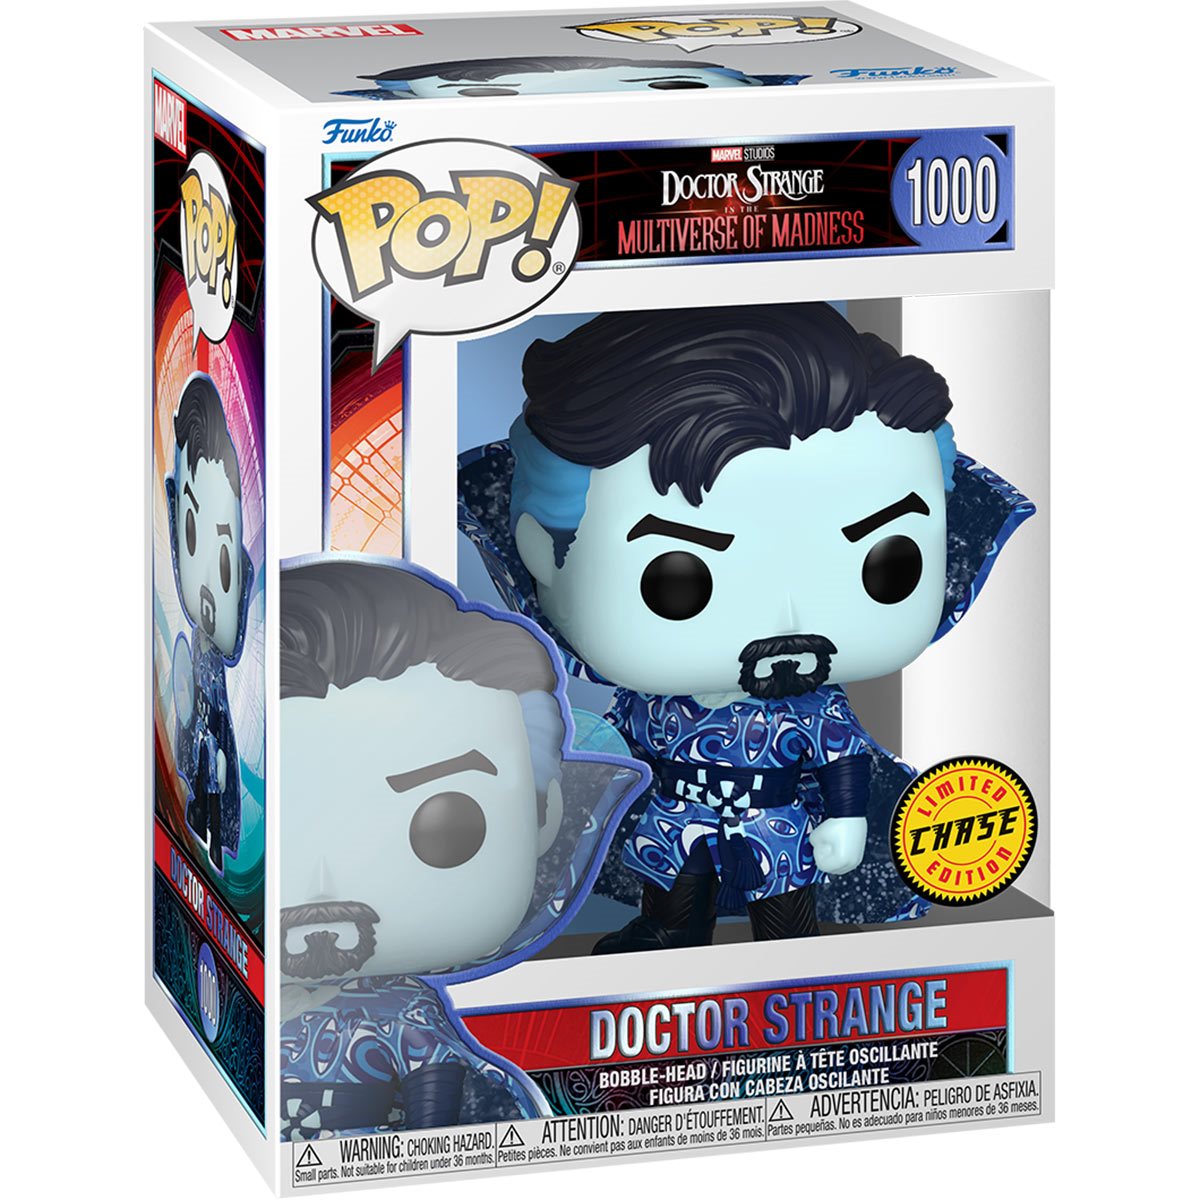 Funko Pop! Marvel: Doctor Strange in the Multiverse of Madness - Doctor Strange (Exclusive Chase Version)